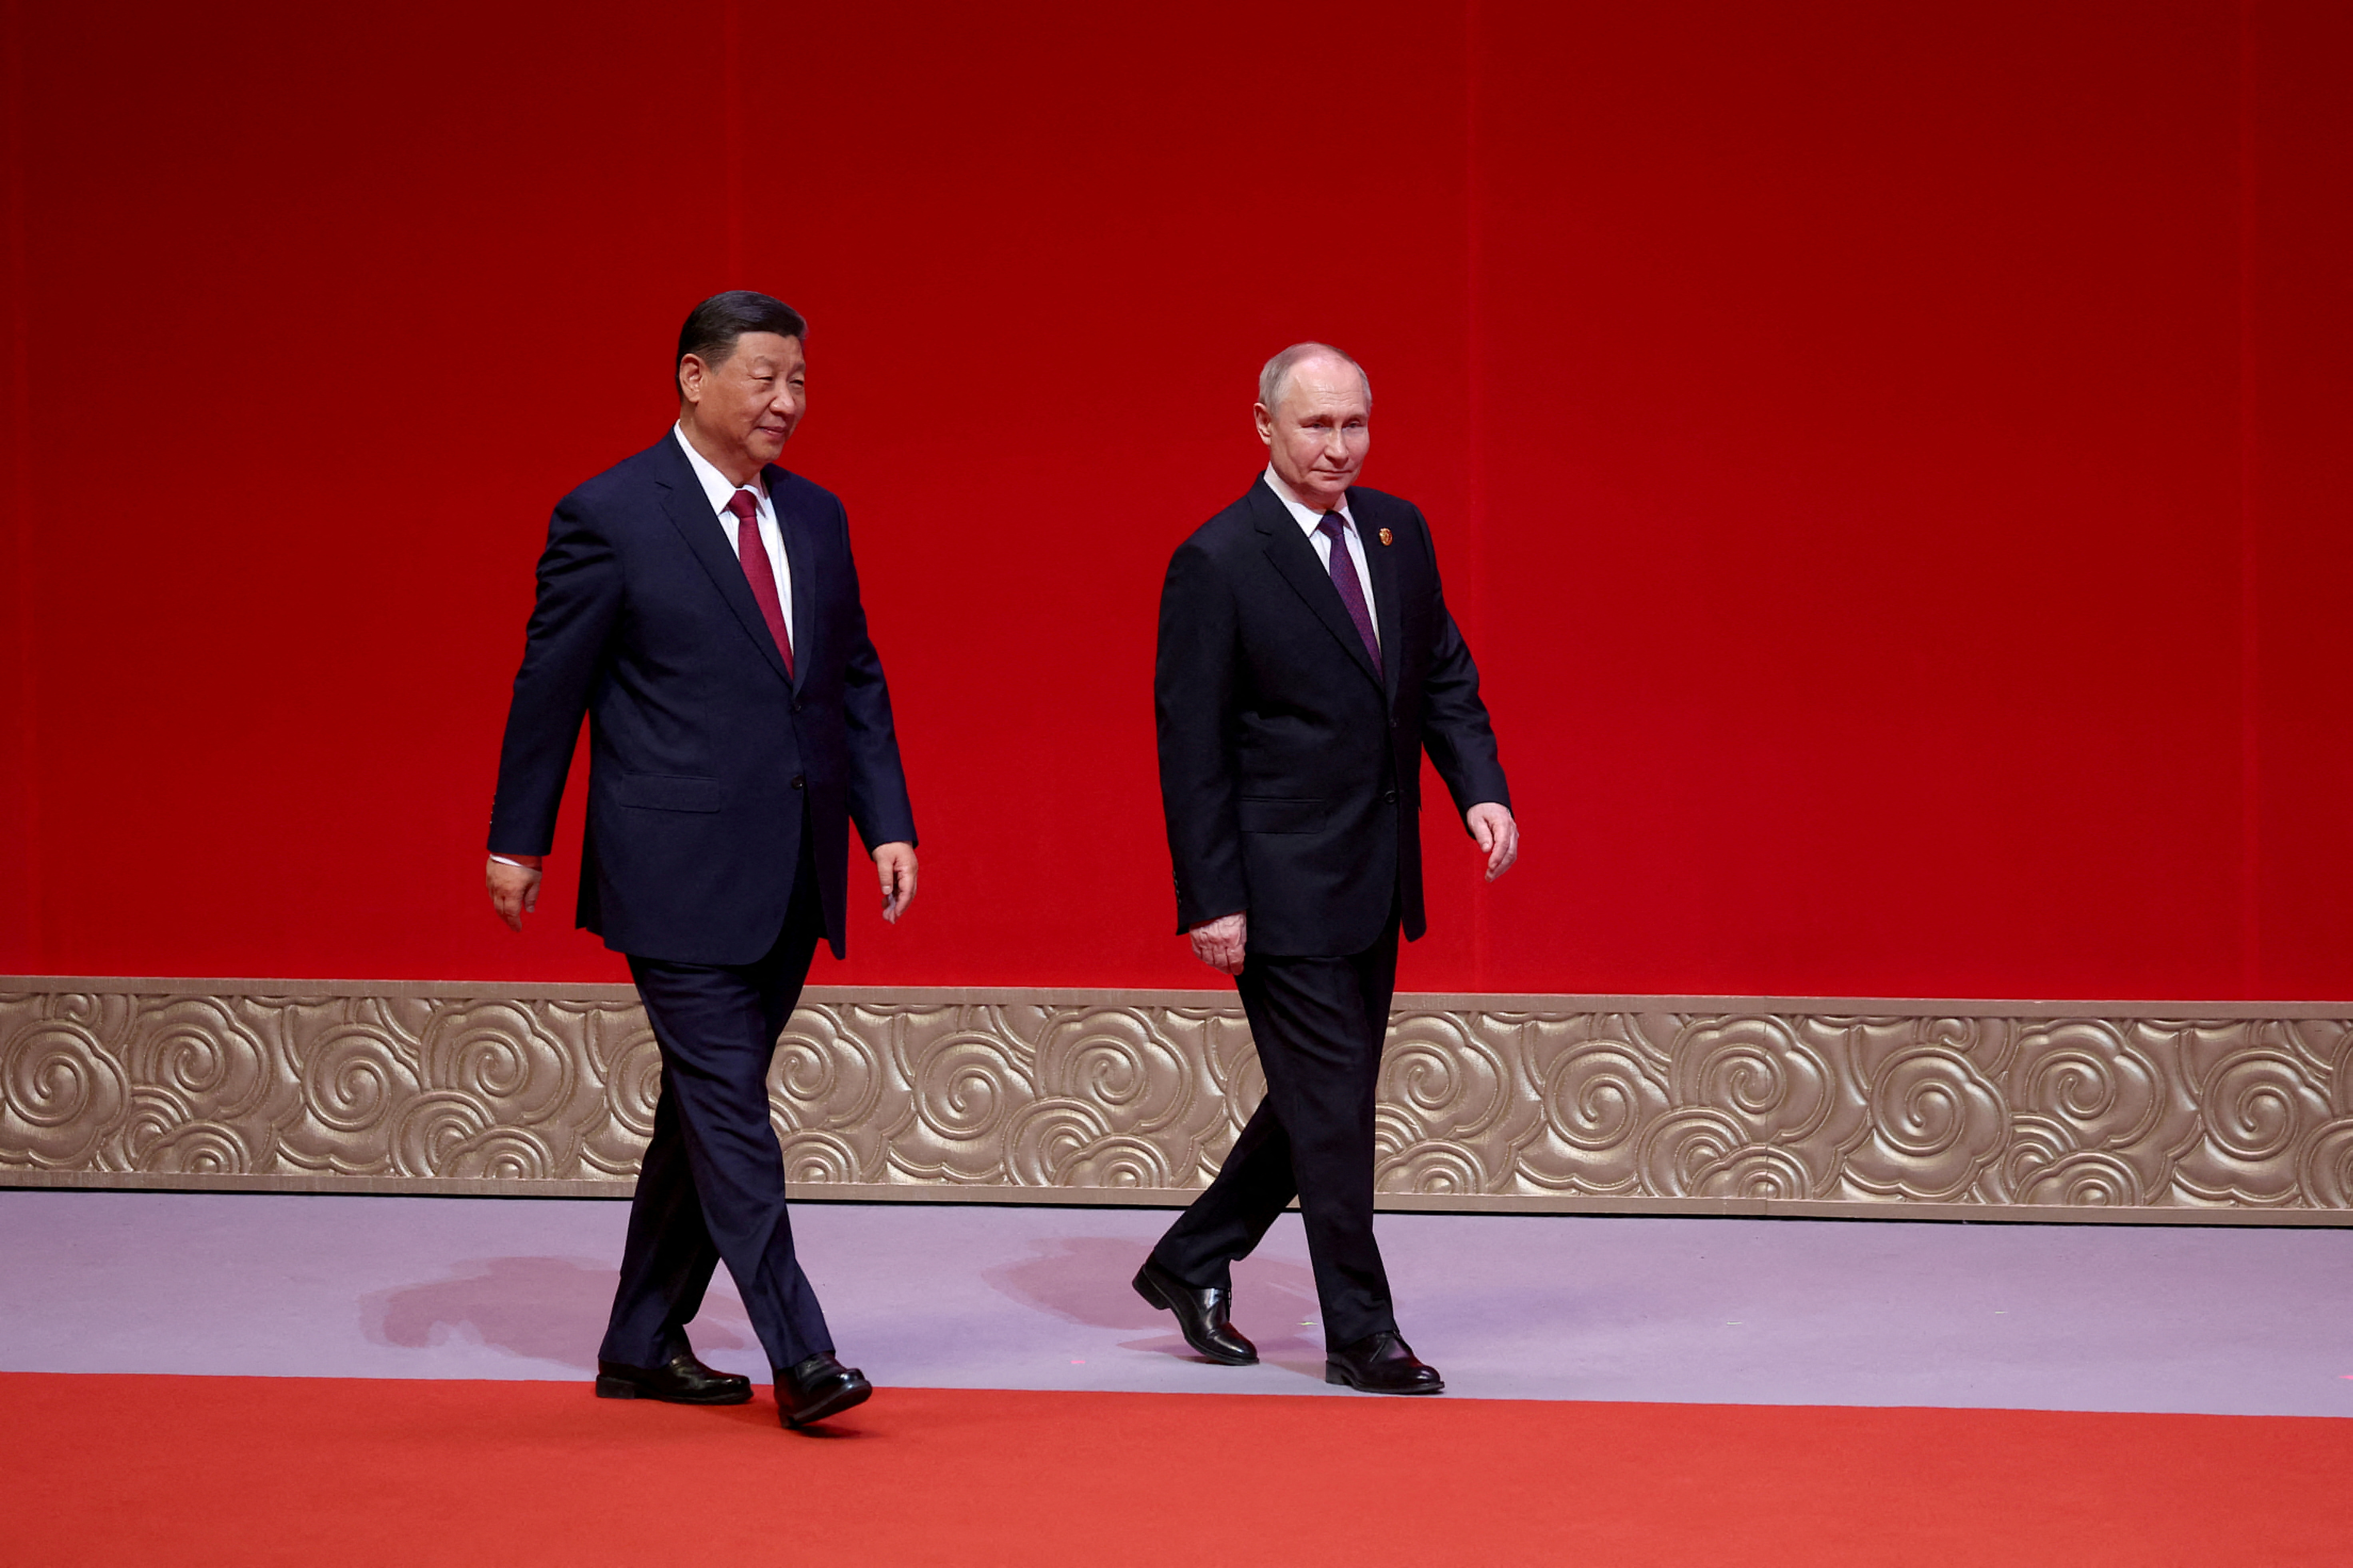 Xi, Putin attend gala event celebrating 75th anniversary of China-Russia relations in Beijing